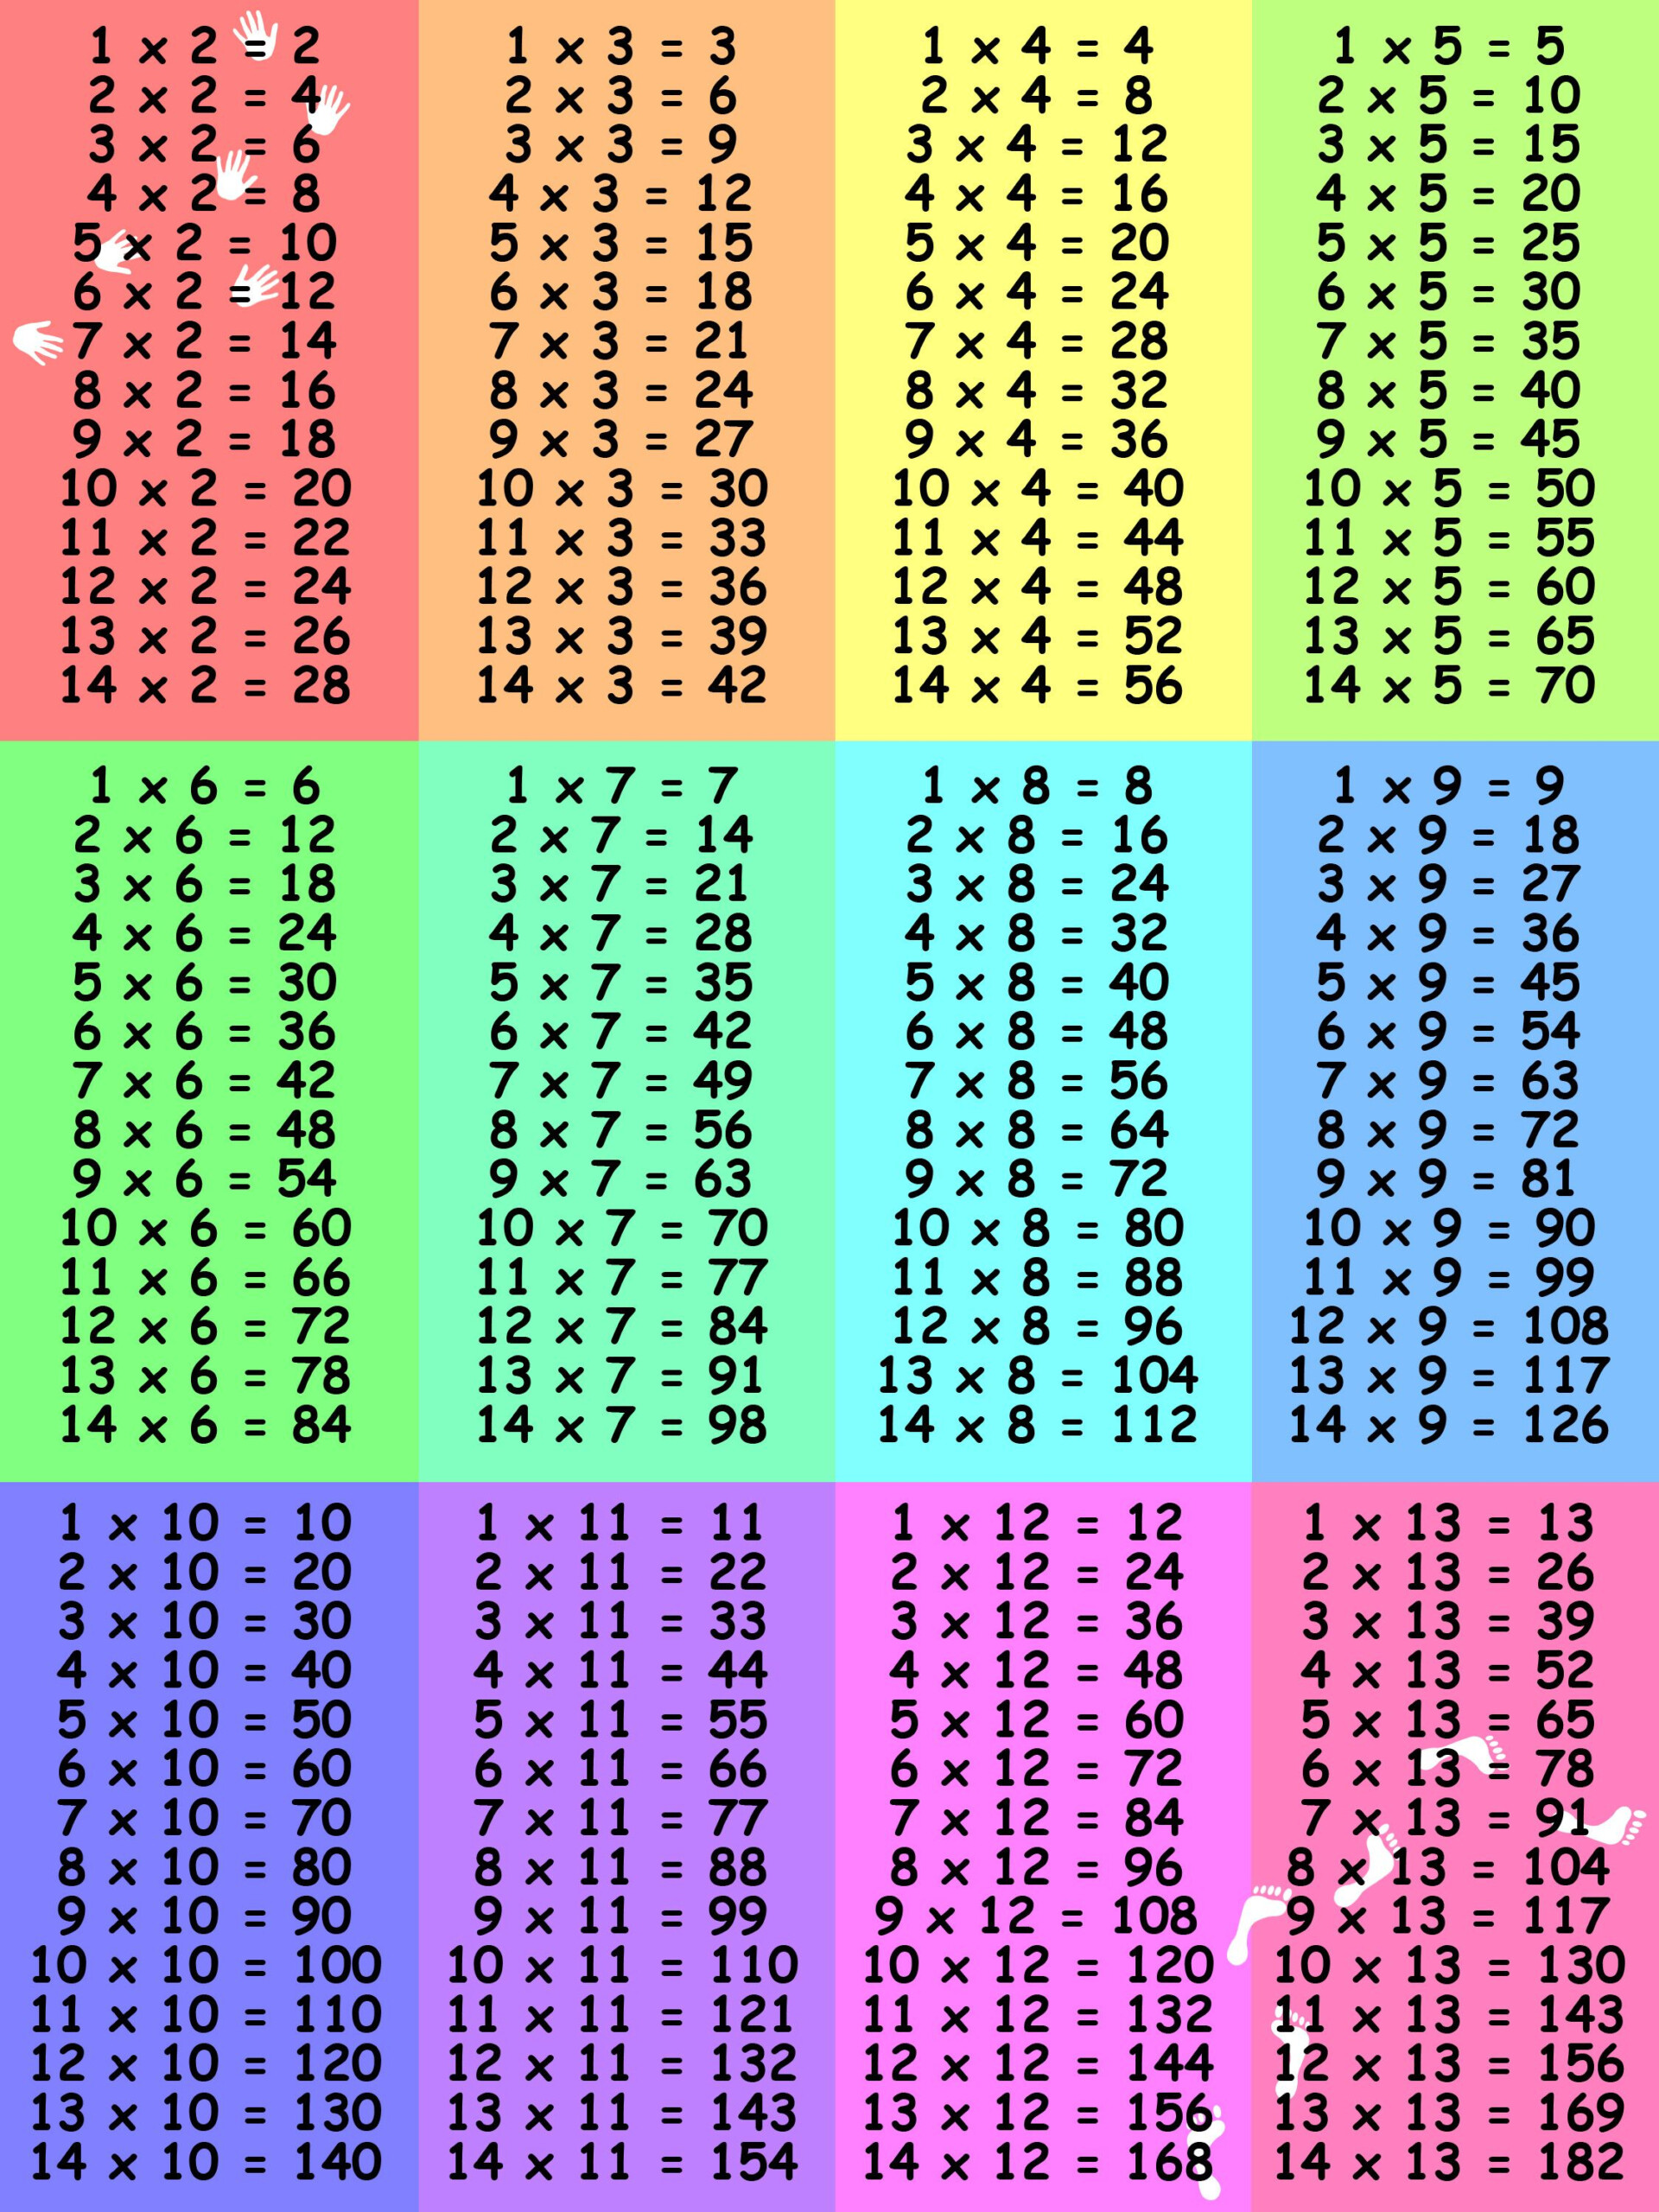 Large Multiplication Table For Mathematics Exercise 